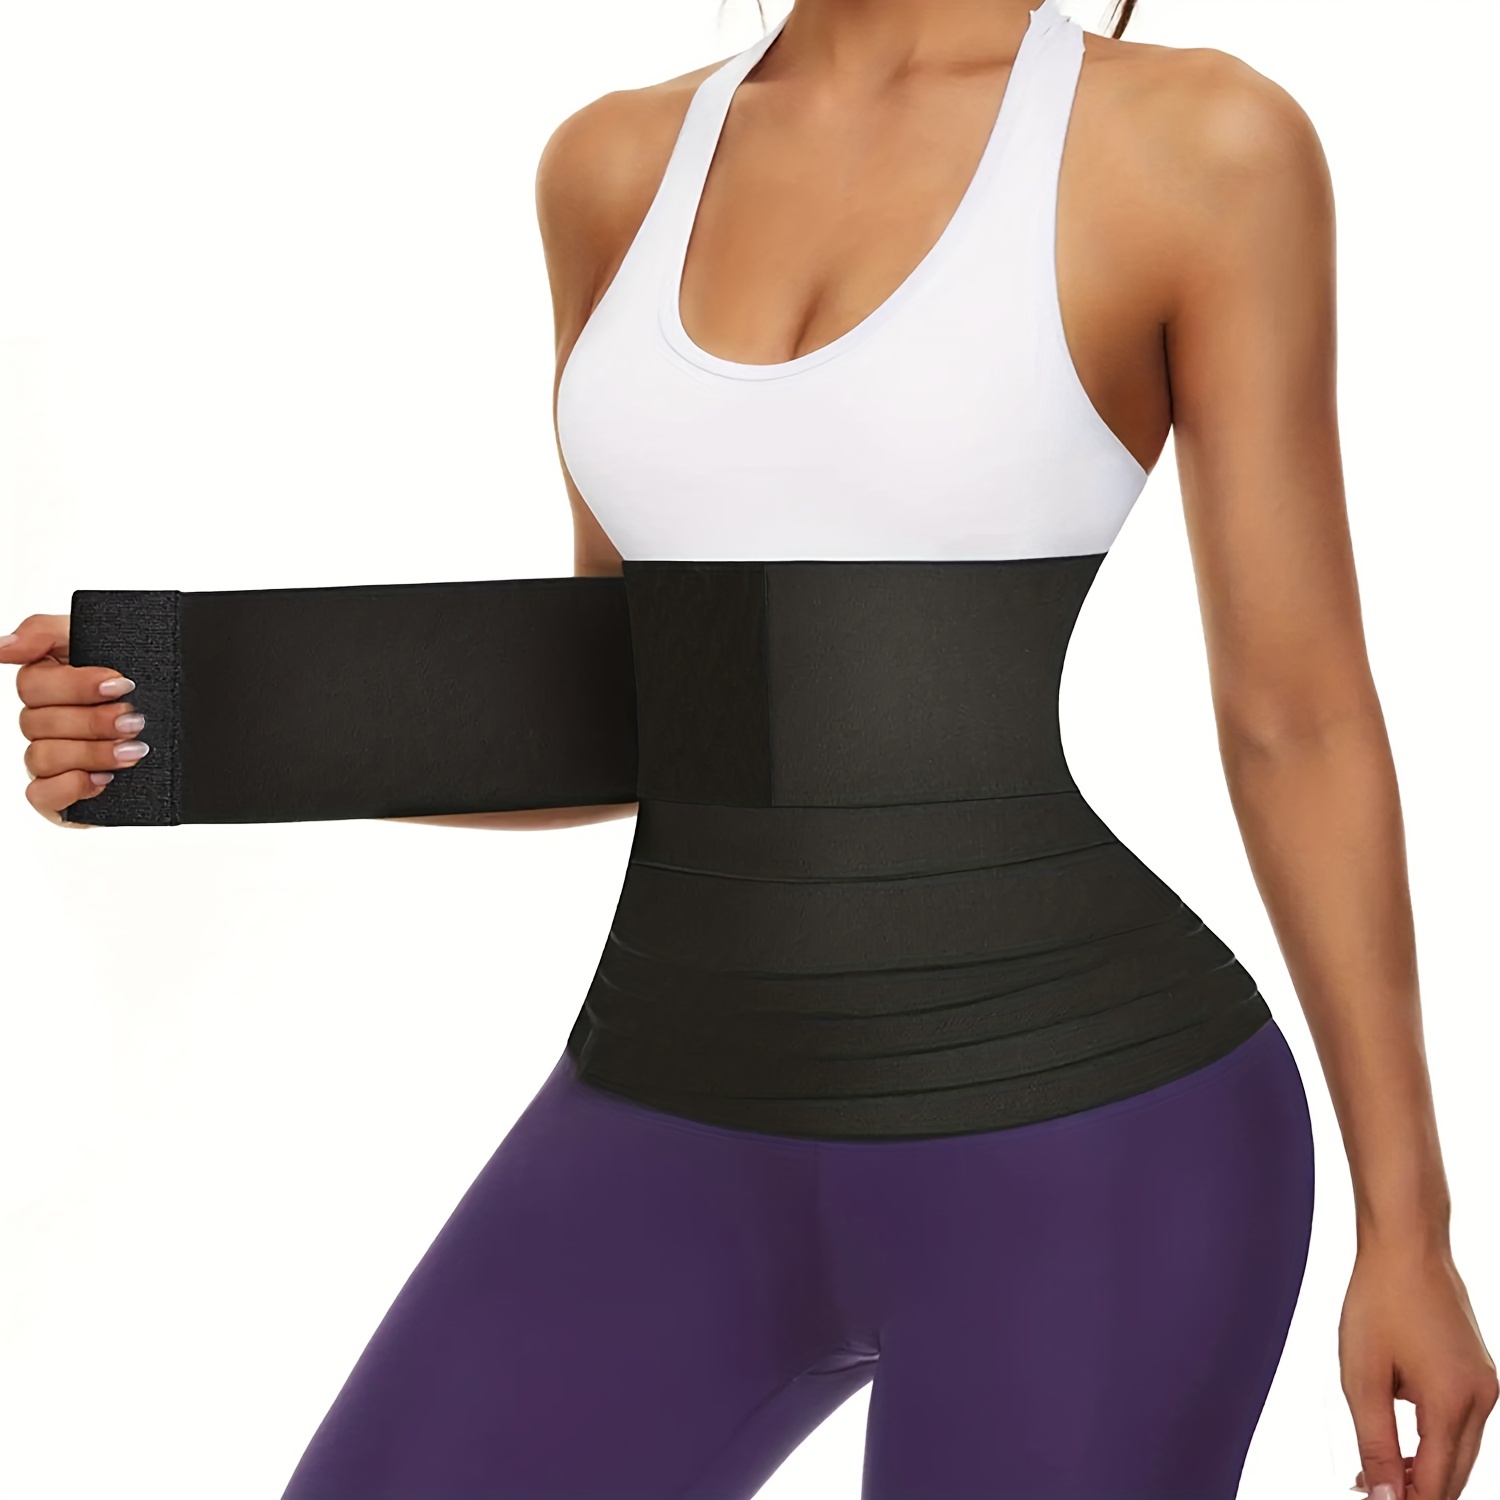 Cheap Snatch Me Up Bandage Wrap Waist Trainer for Women Sauna Slimming Belt  Sweat Belly Wraps Slimming Sheath Body Shaper Stomach Bands